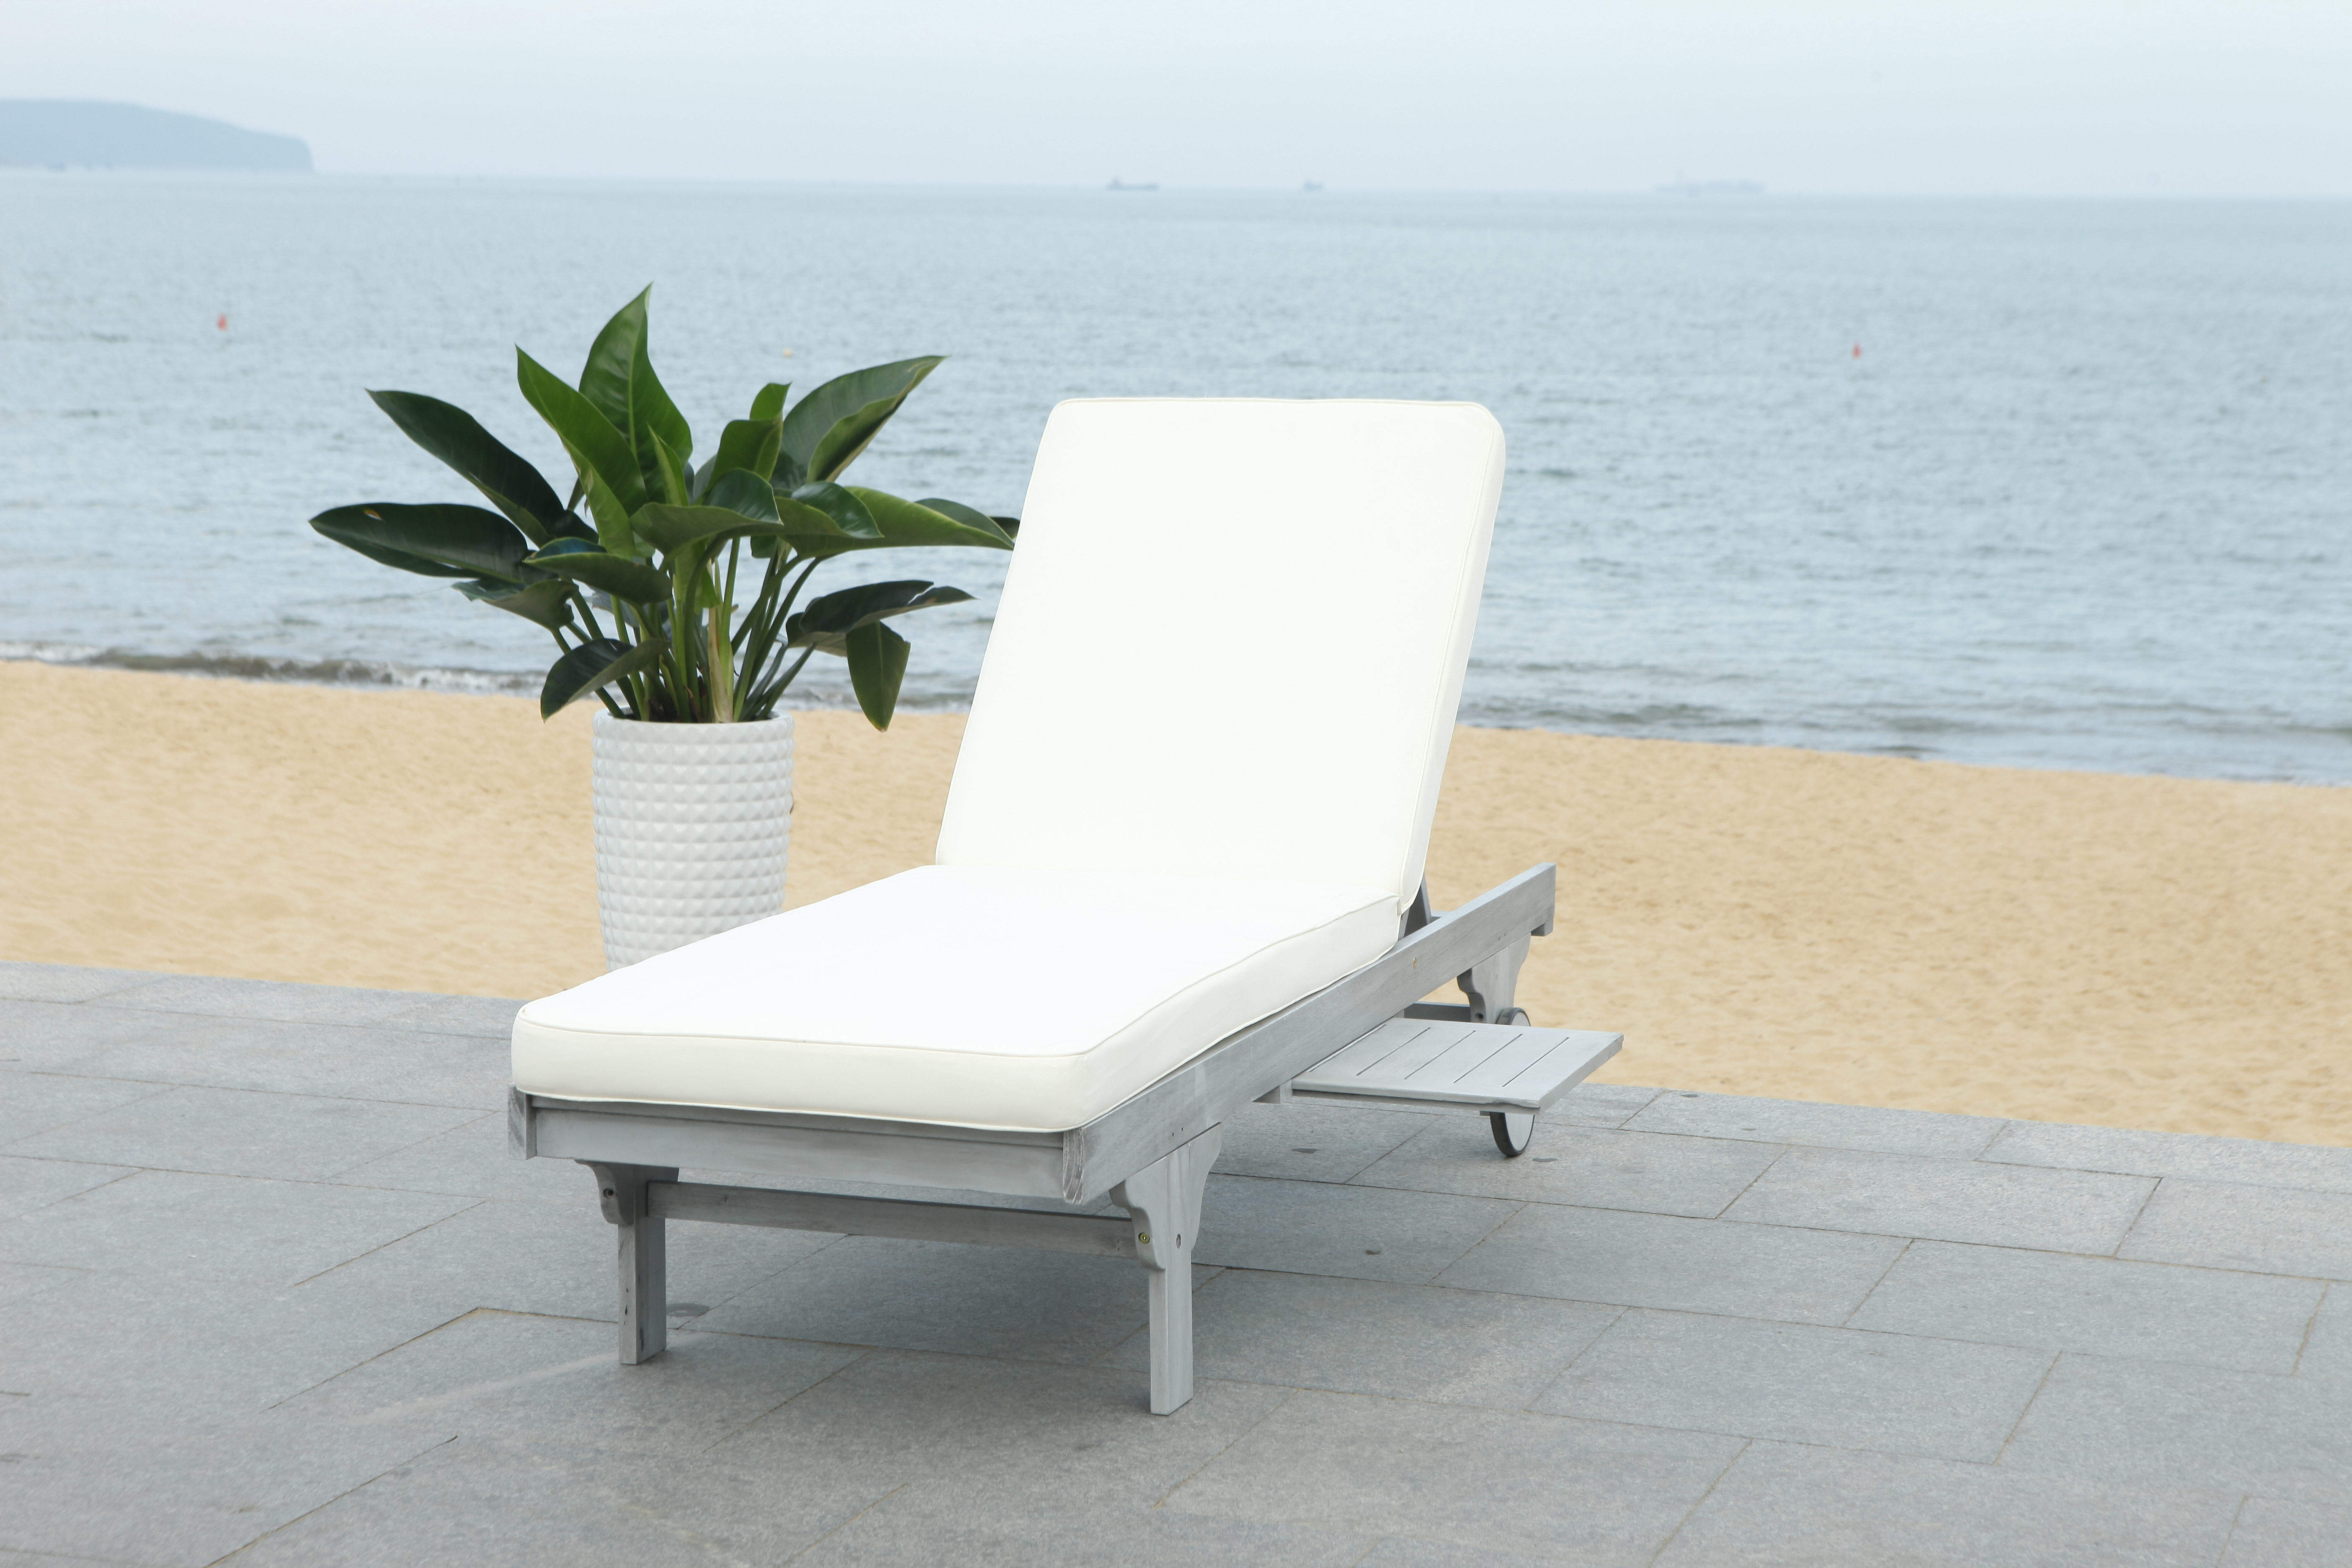 Newport Chaise Lounge Chair With Side Table, Ash Gray & White - Image 6